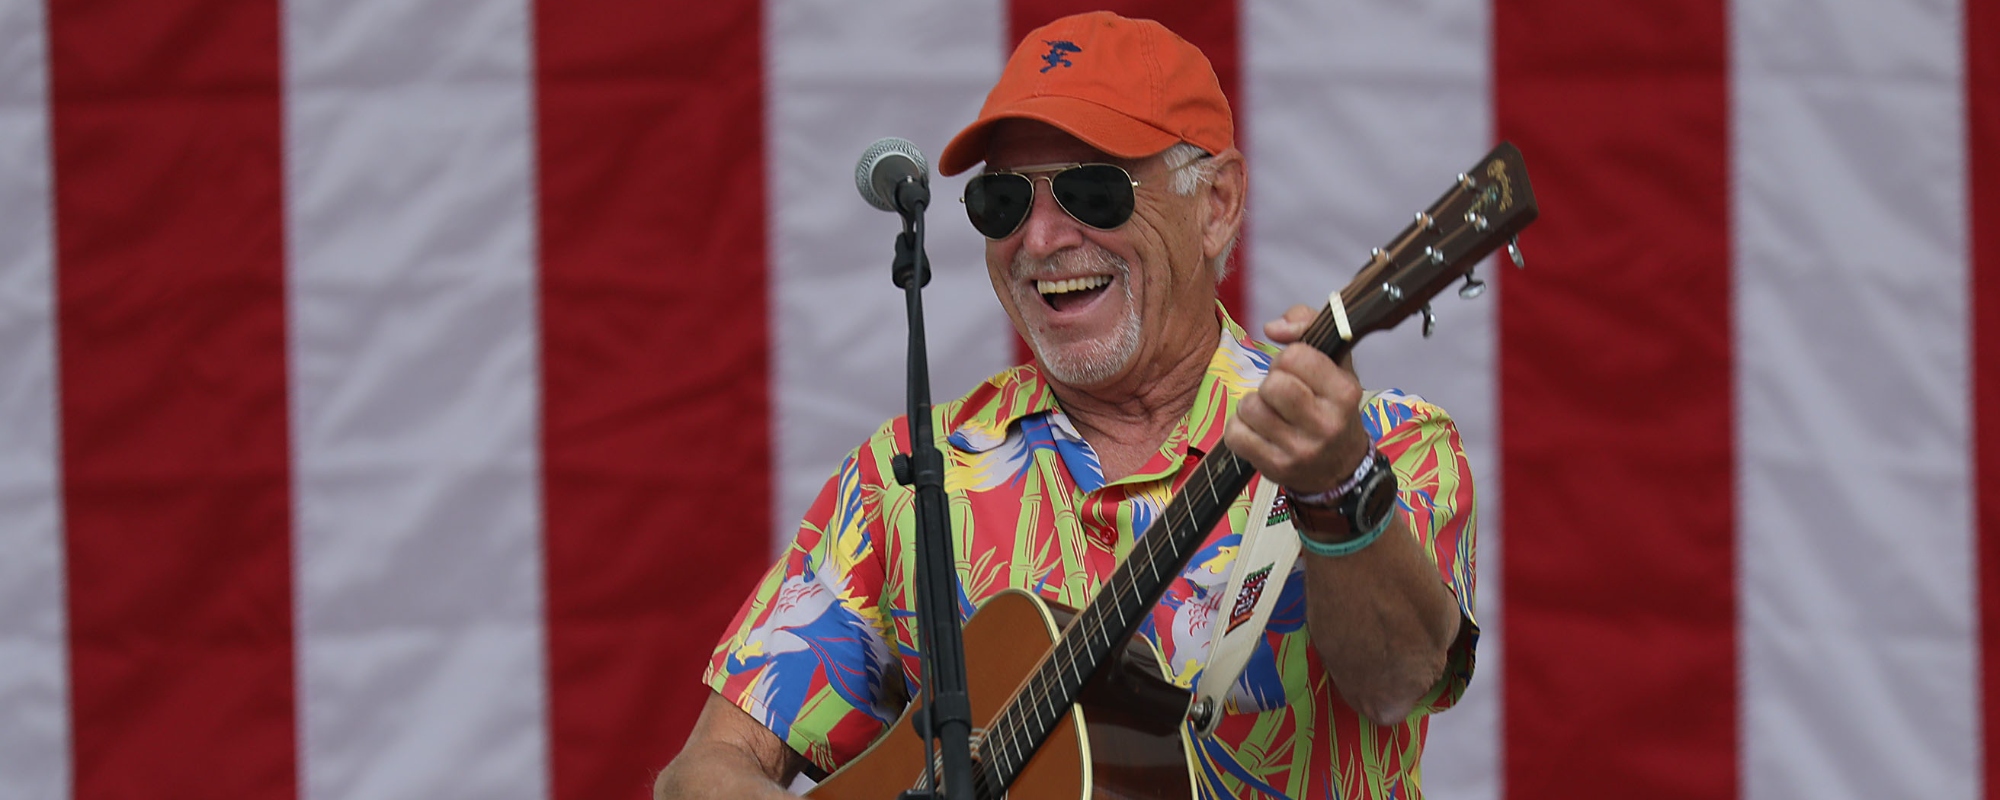 Jimmy Buffett to Receive Musical Excellence Award from Rock and Roll Hall of Fame